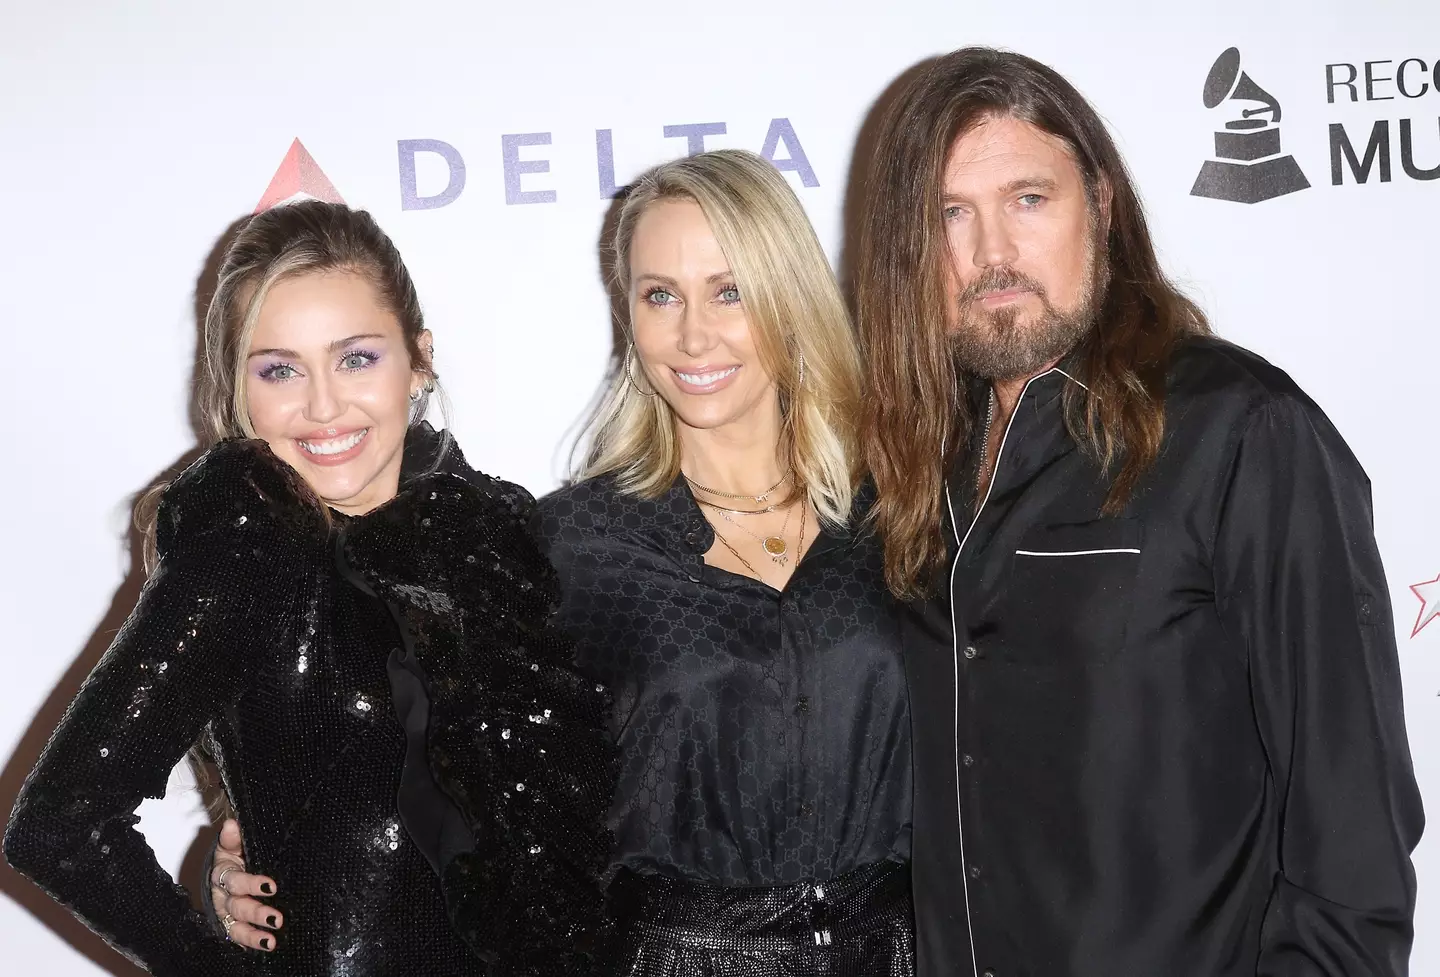 Miley Cyrus pictured with her parents, Tish and Billy Ray Cyrus.